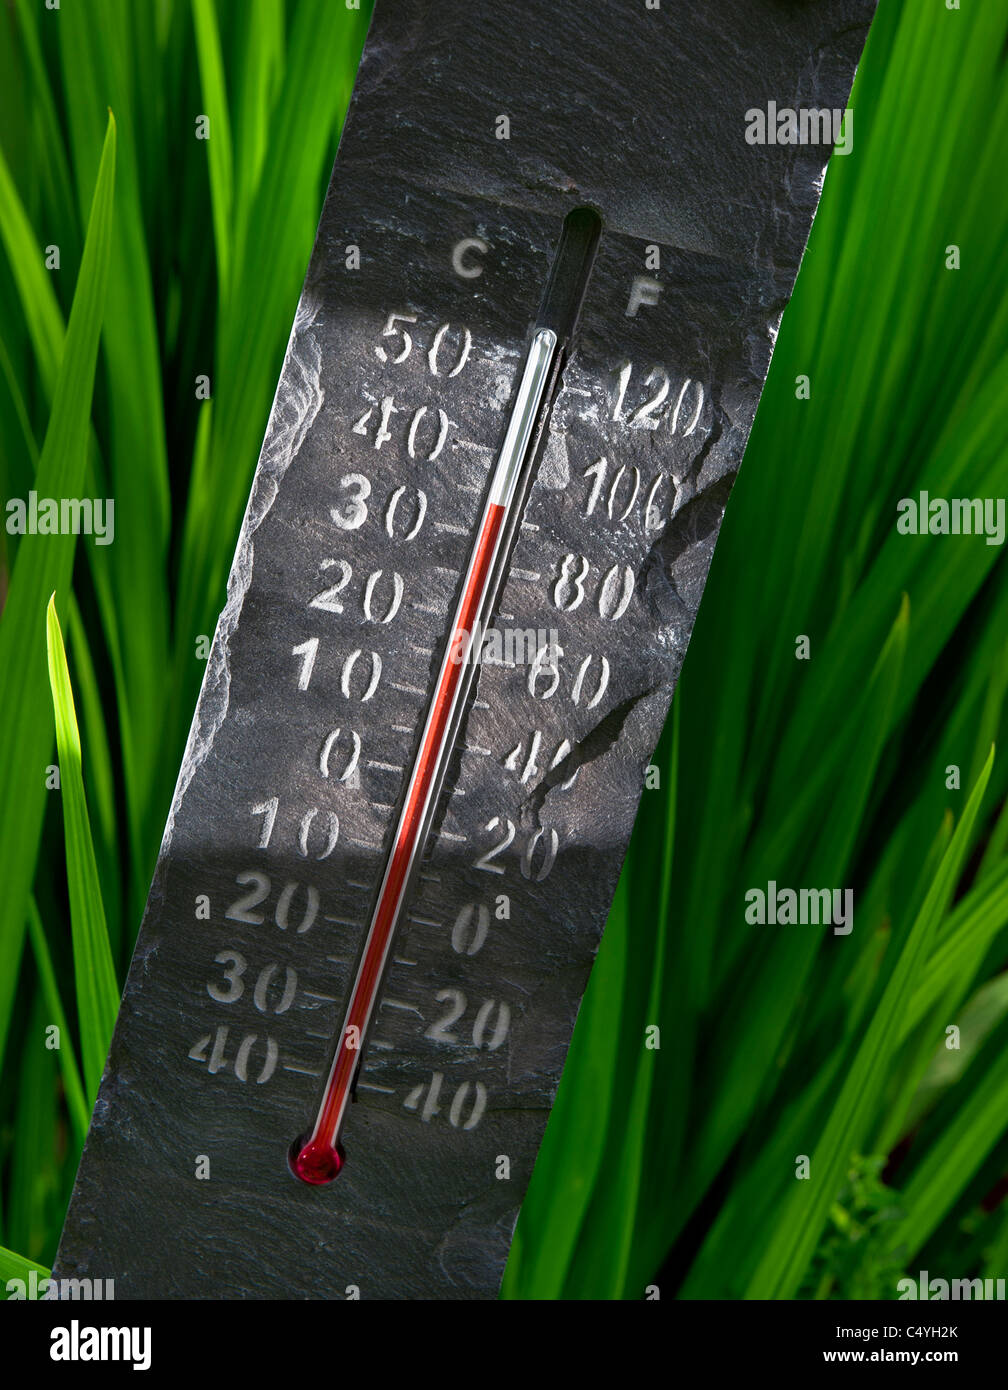 thermometer at 35C 'set in stone' historic temperatures in light shaft Stock Photo